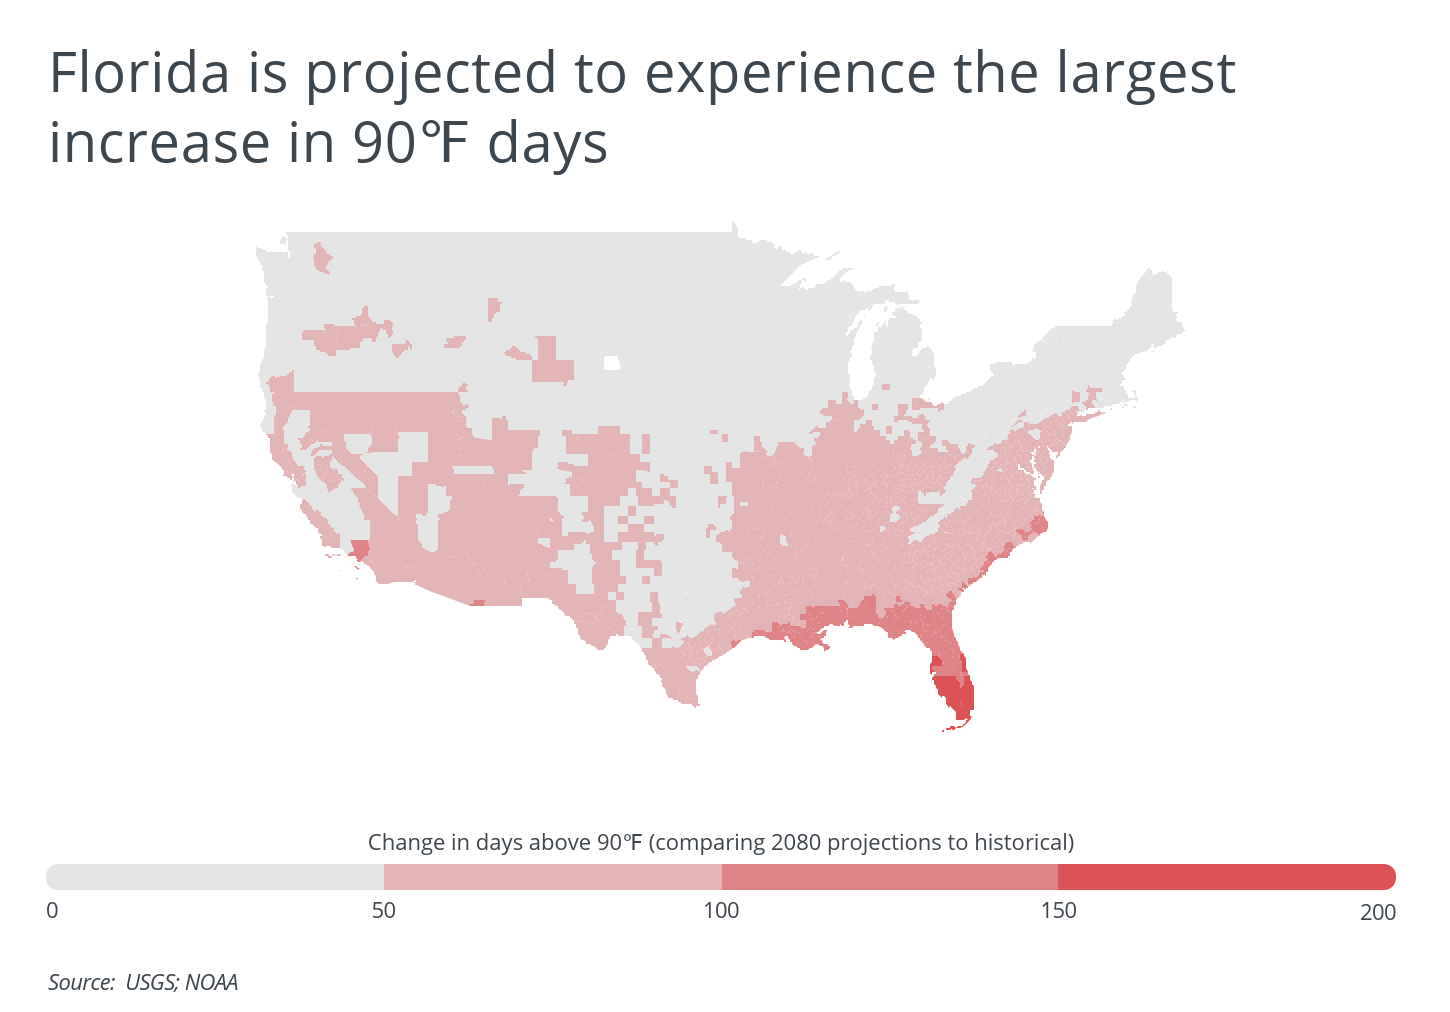 Florida is projected to experience the largest increase in 90 degrees F days